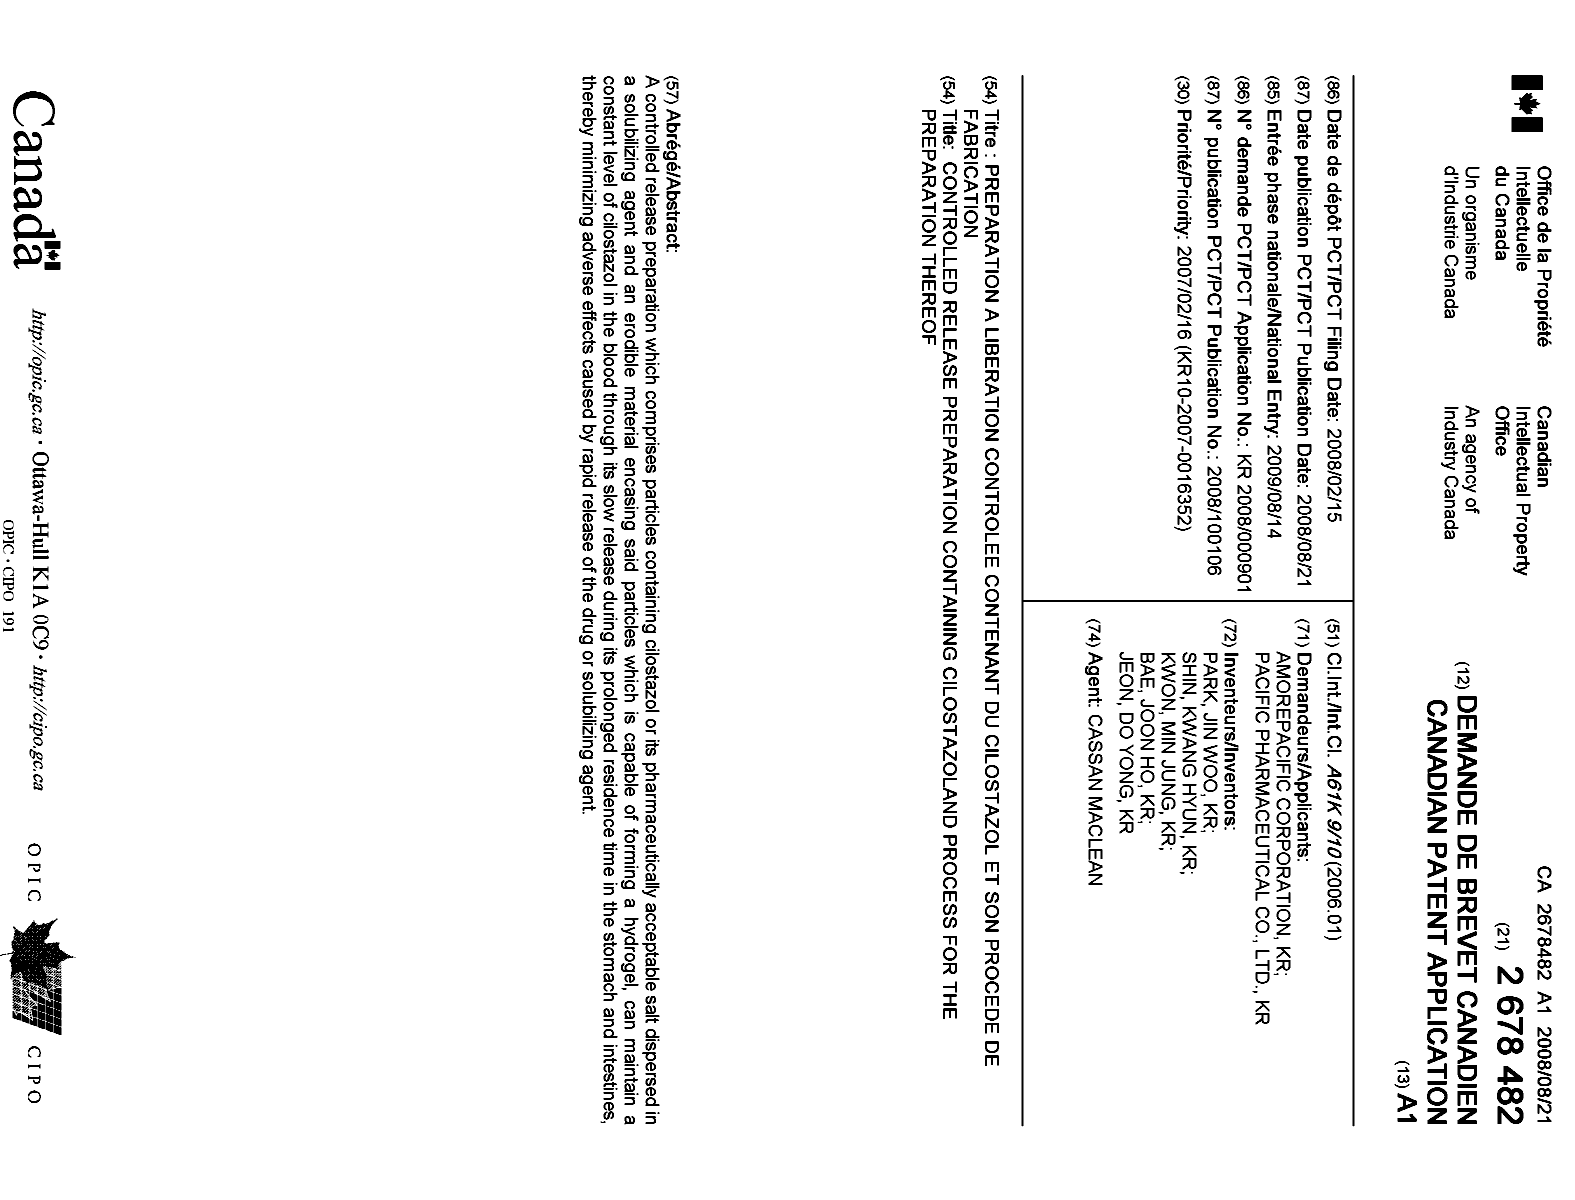 Canadian Patent Document 2678482. Cover Page 20091109. Image 1 of 1